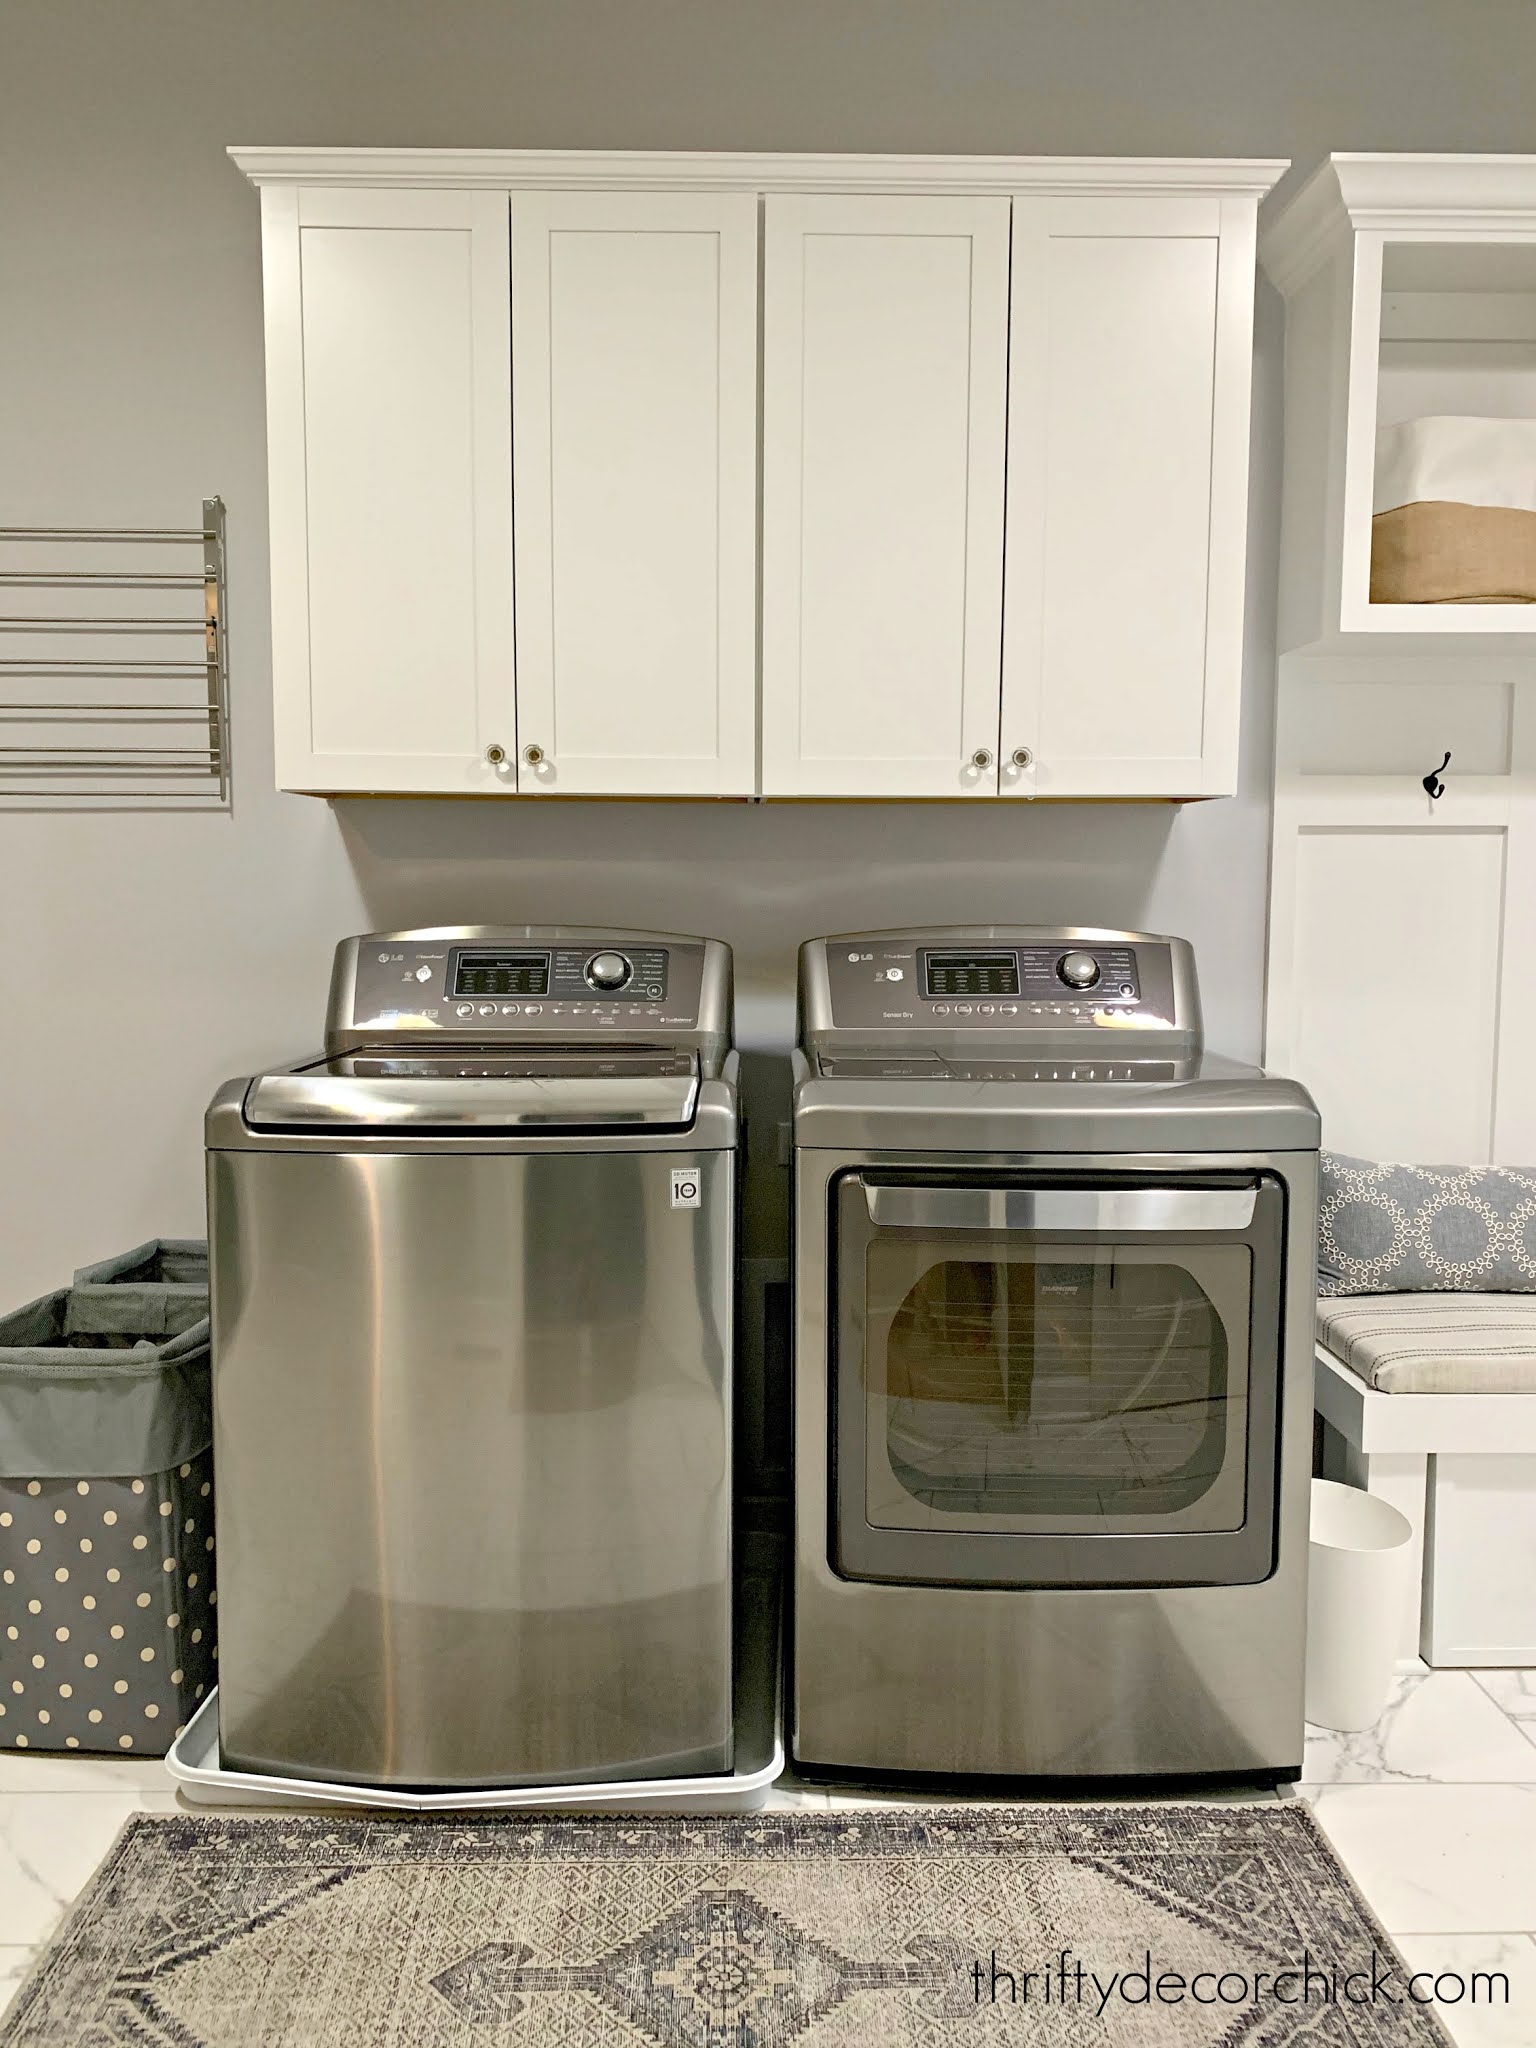 Organizing Our Small Laundry Room - The Homes I Have Made